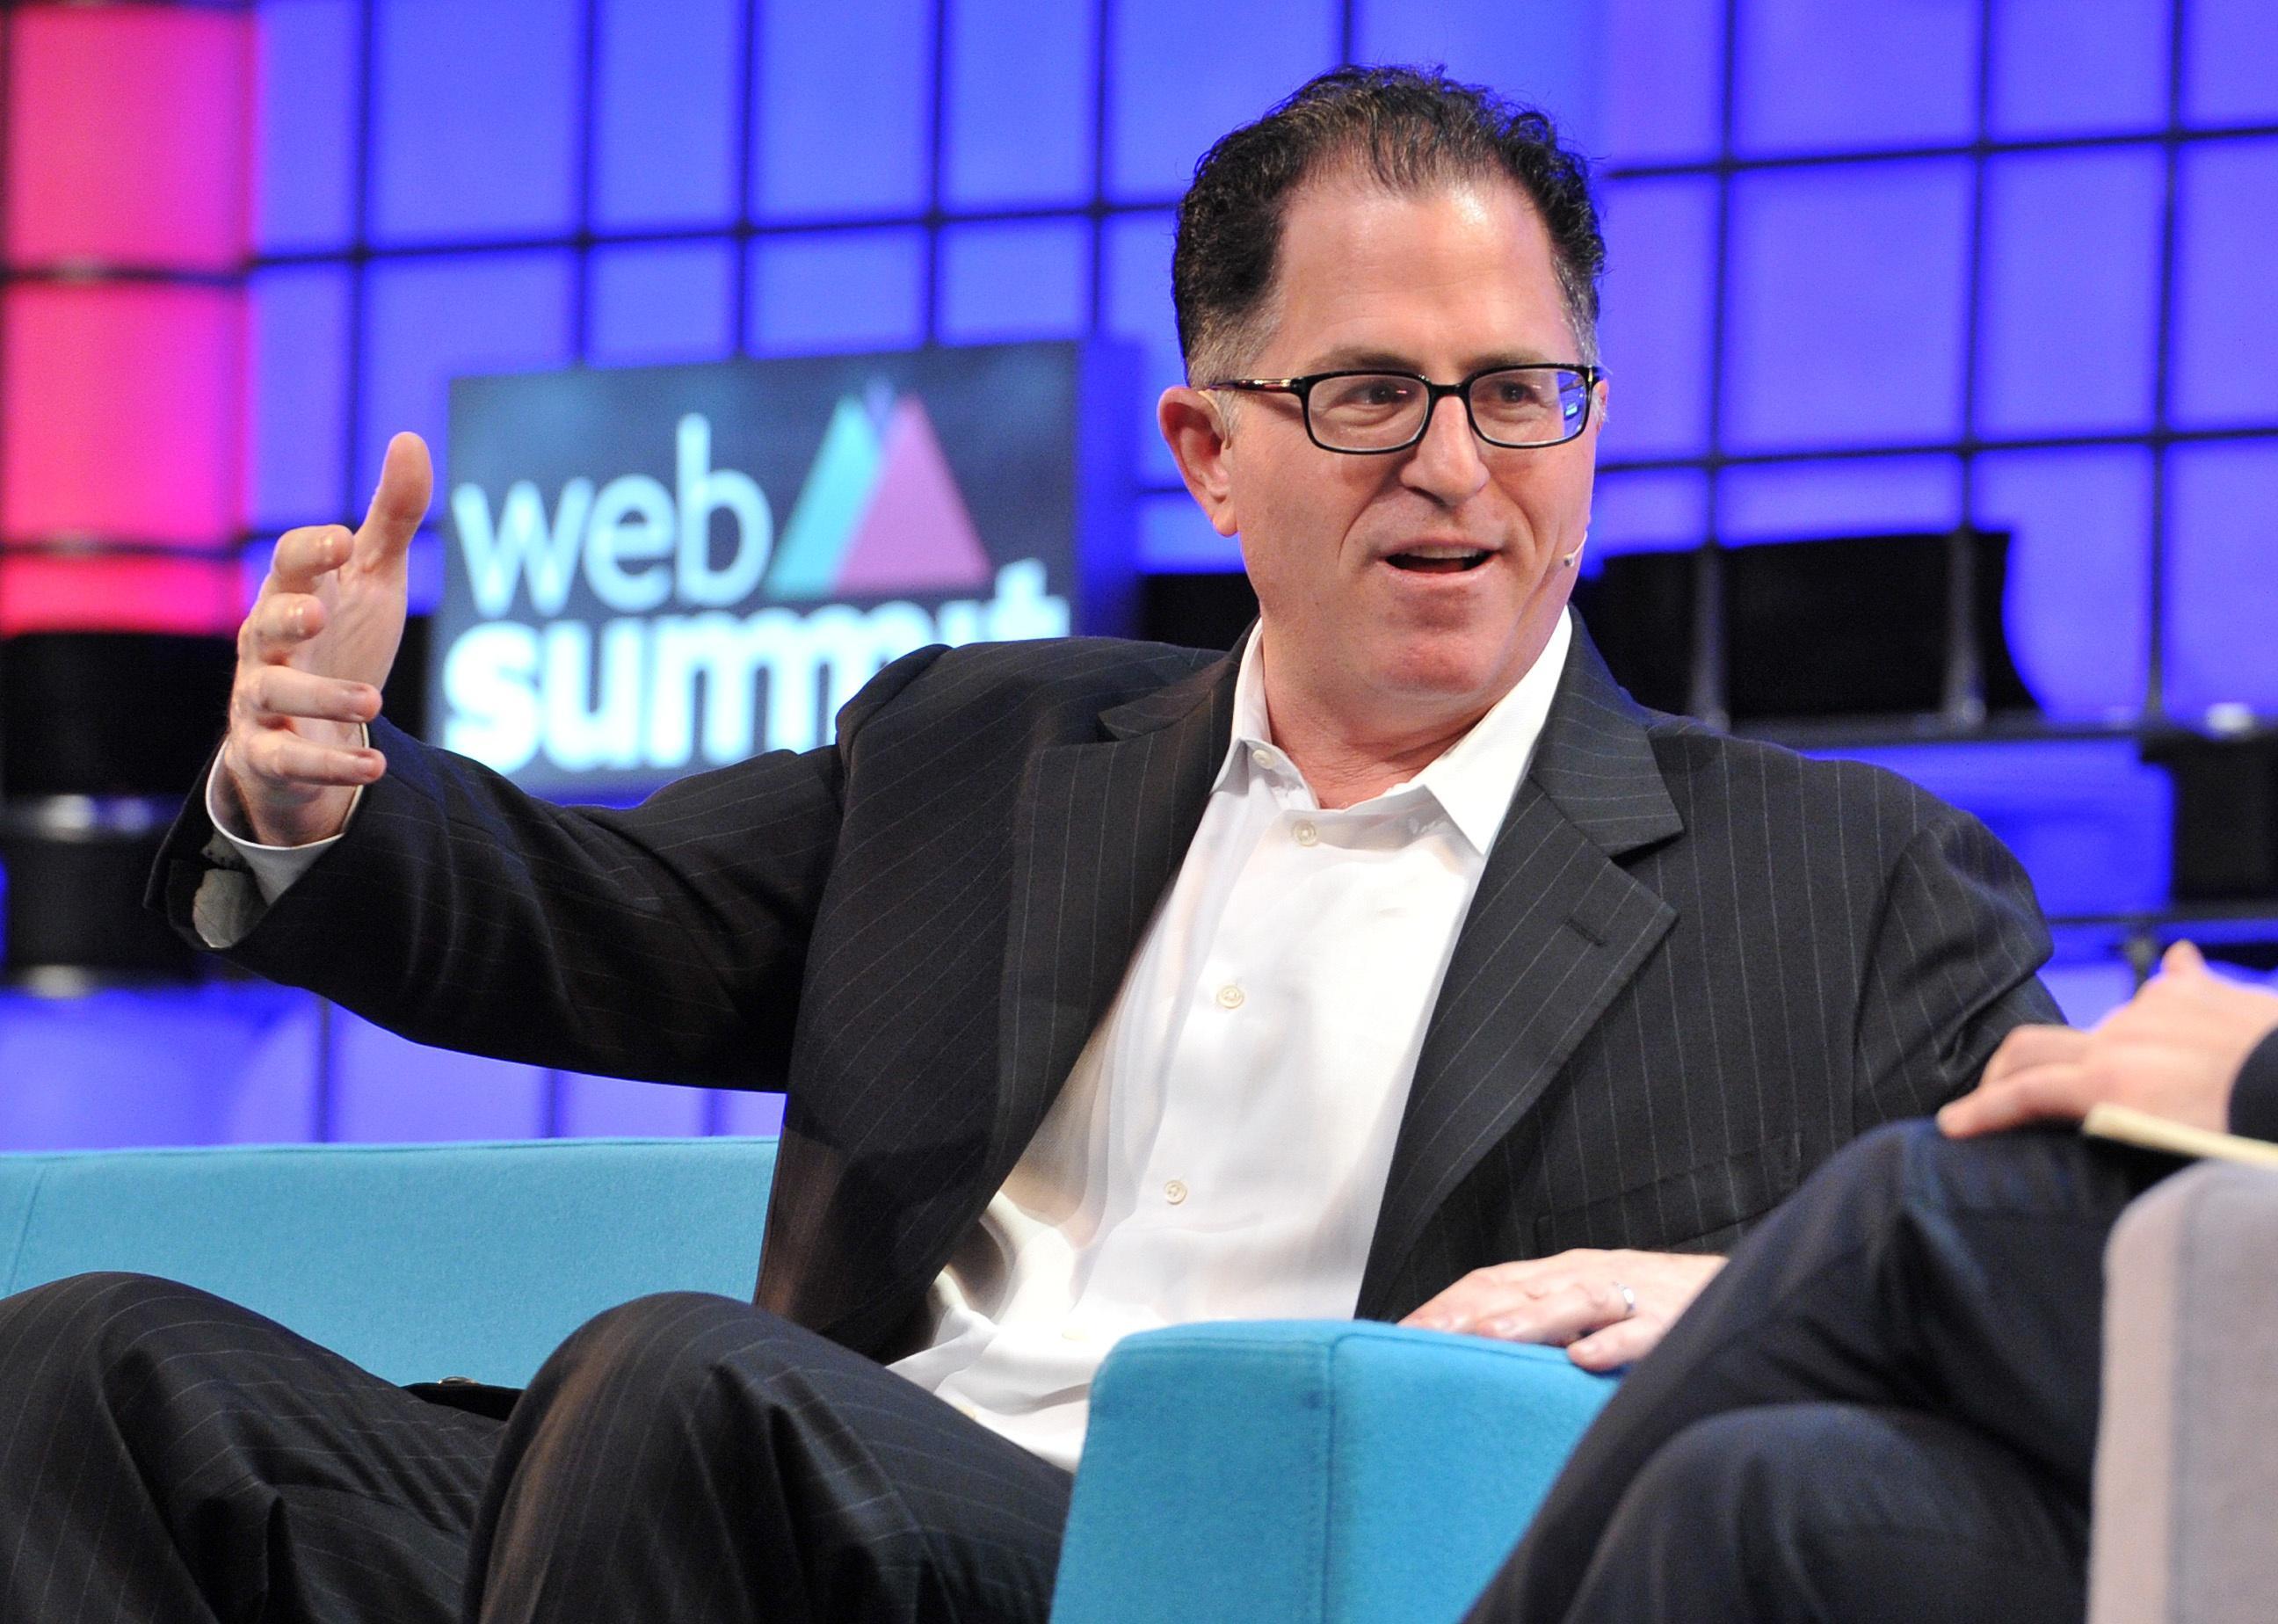 Michael Dell speaking at event.